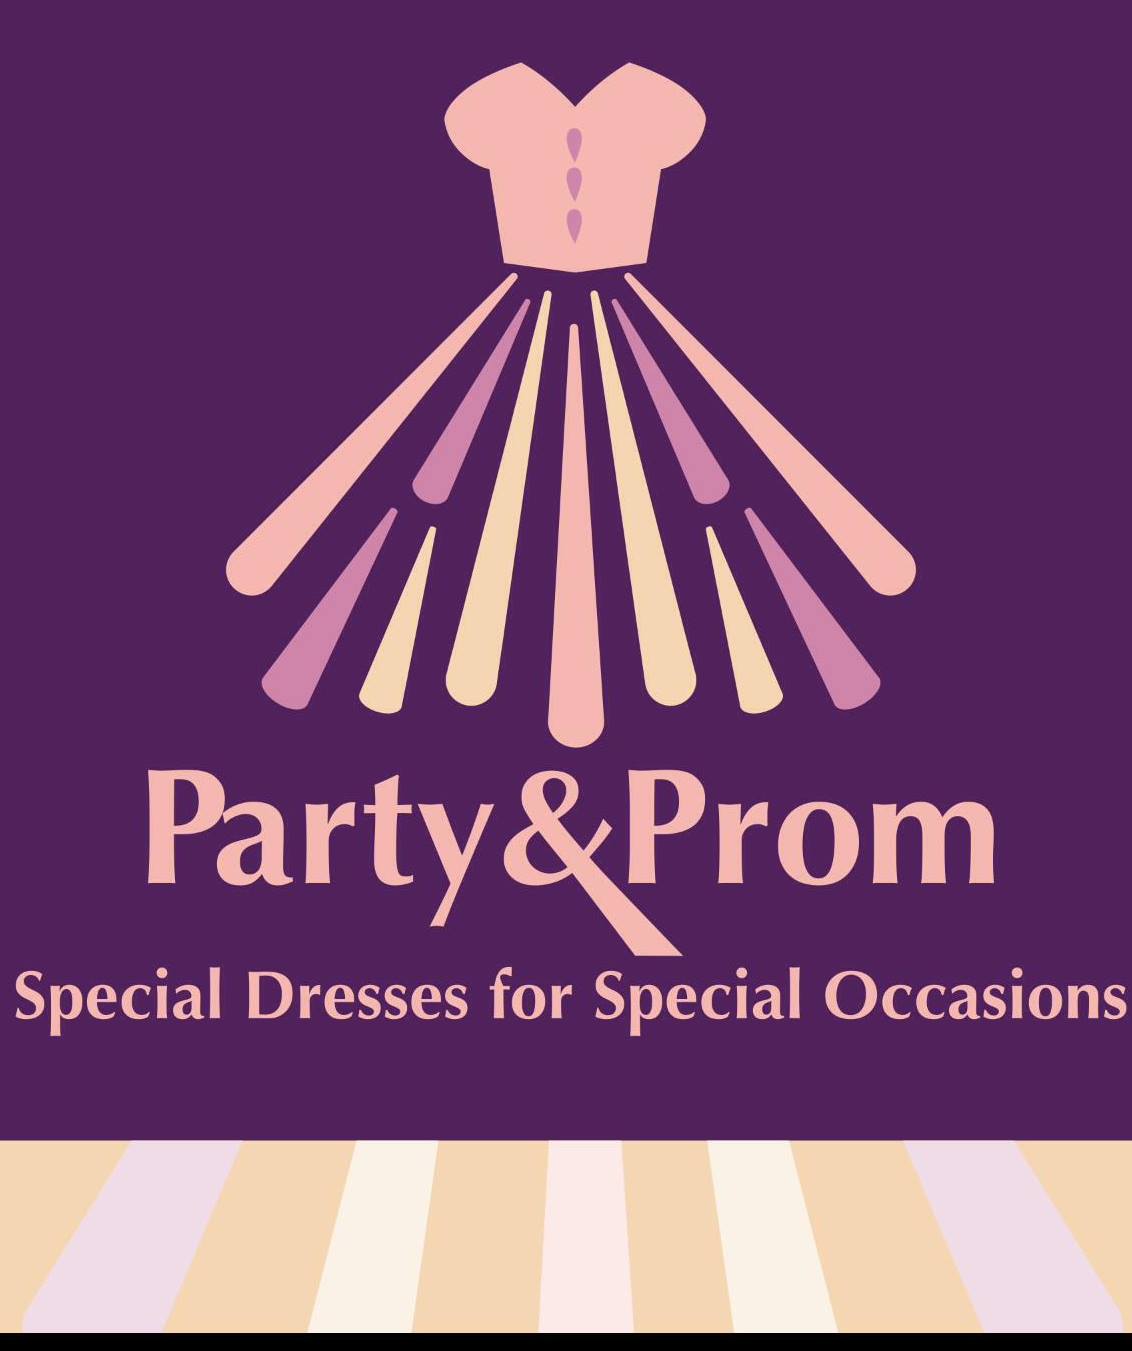 Party & Prom